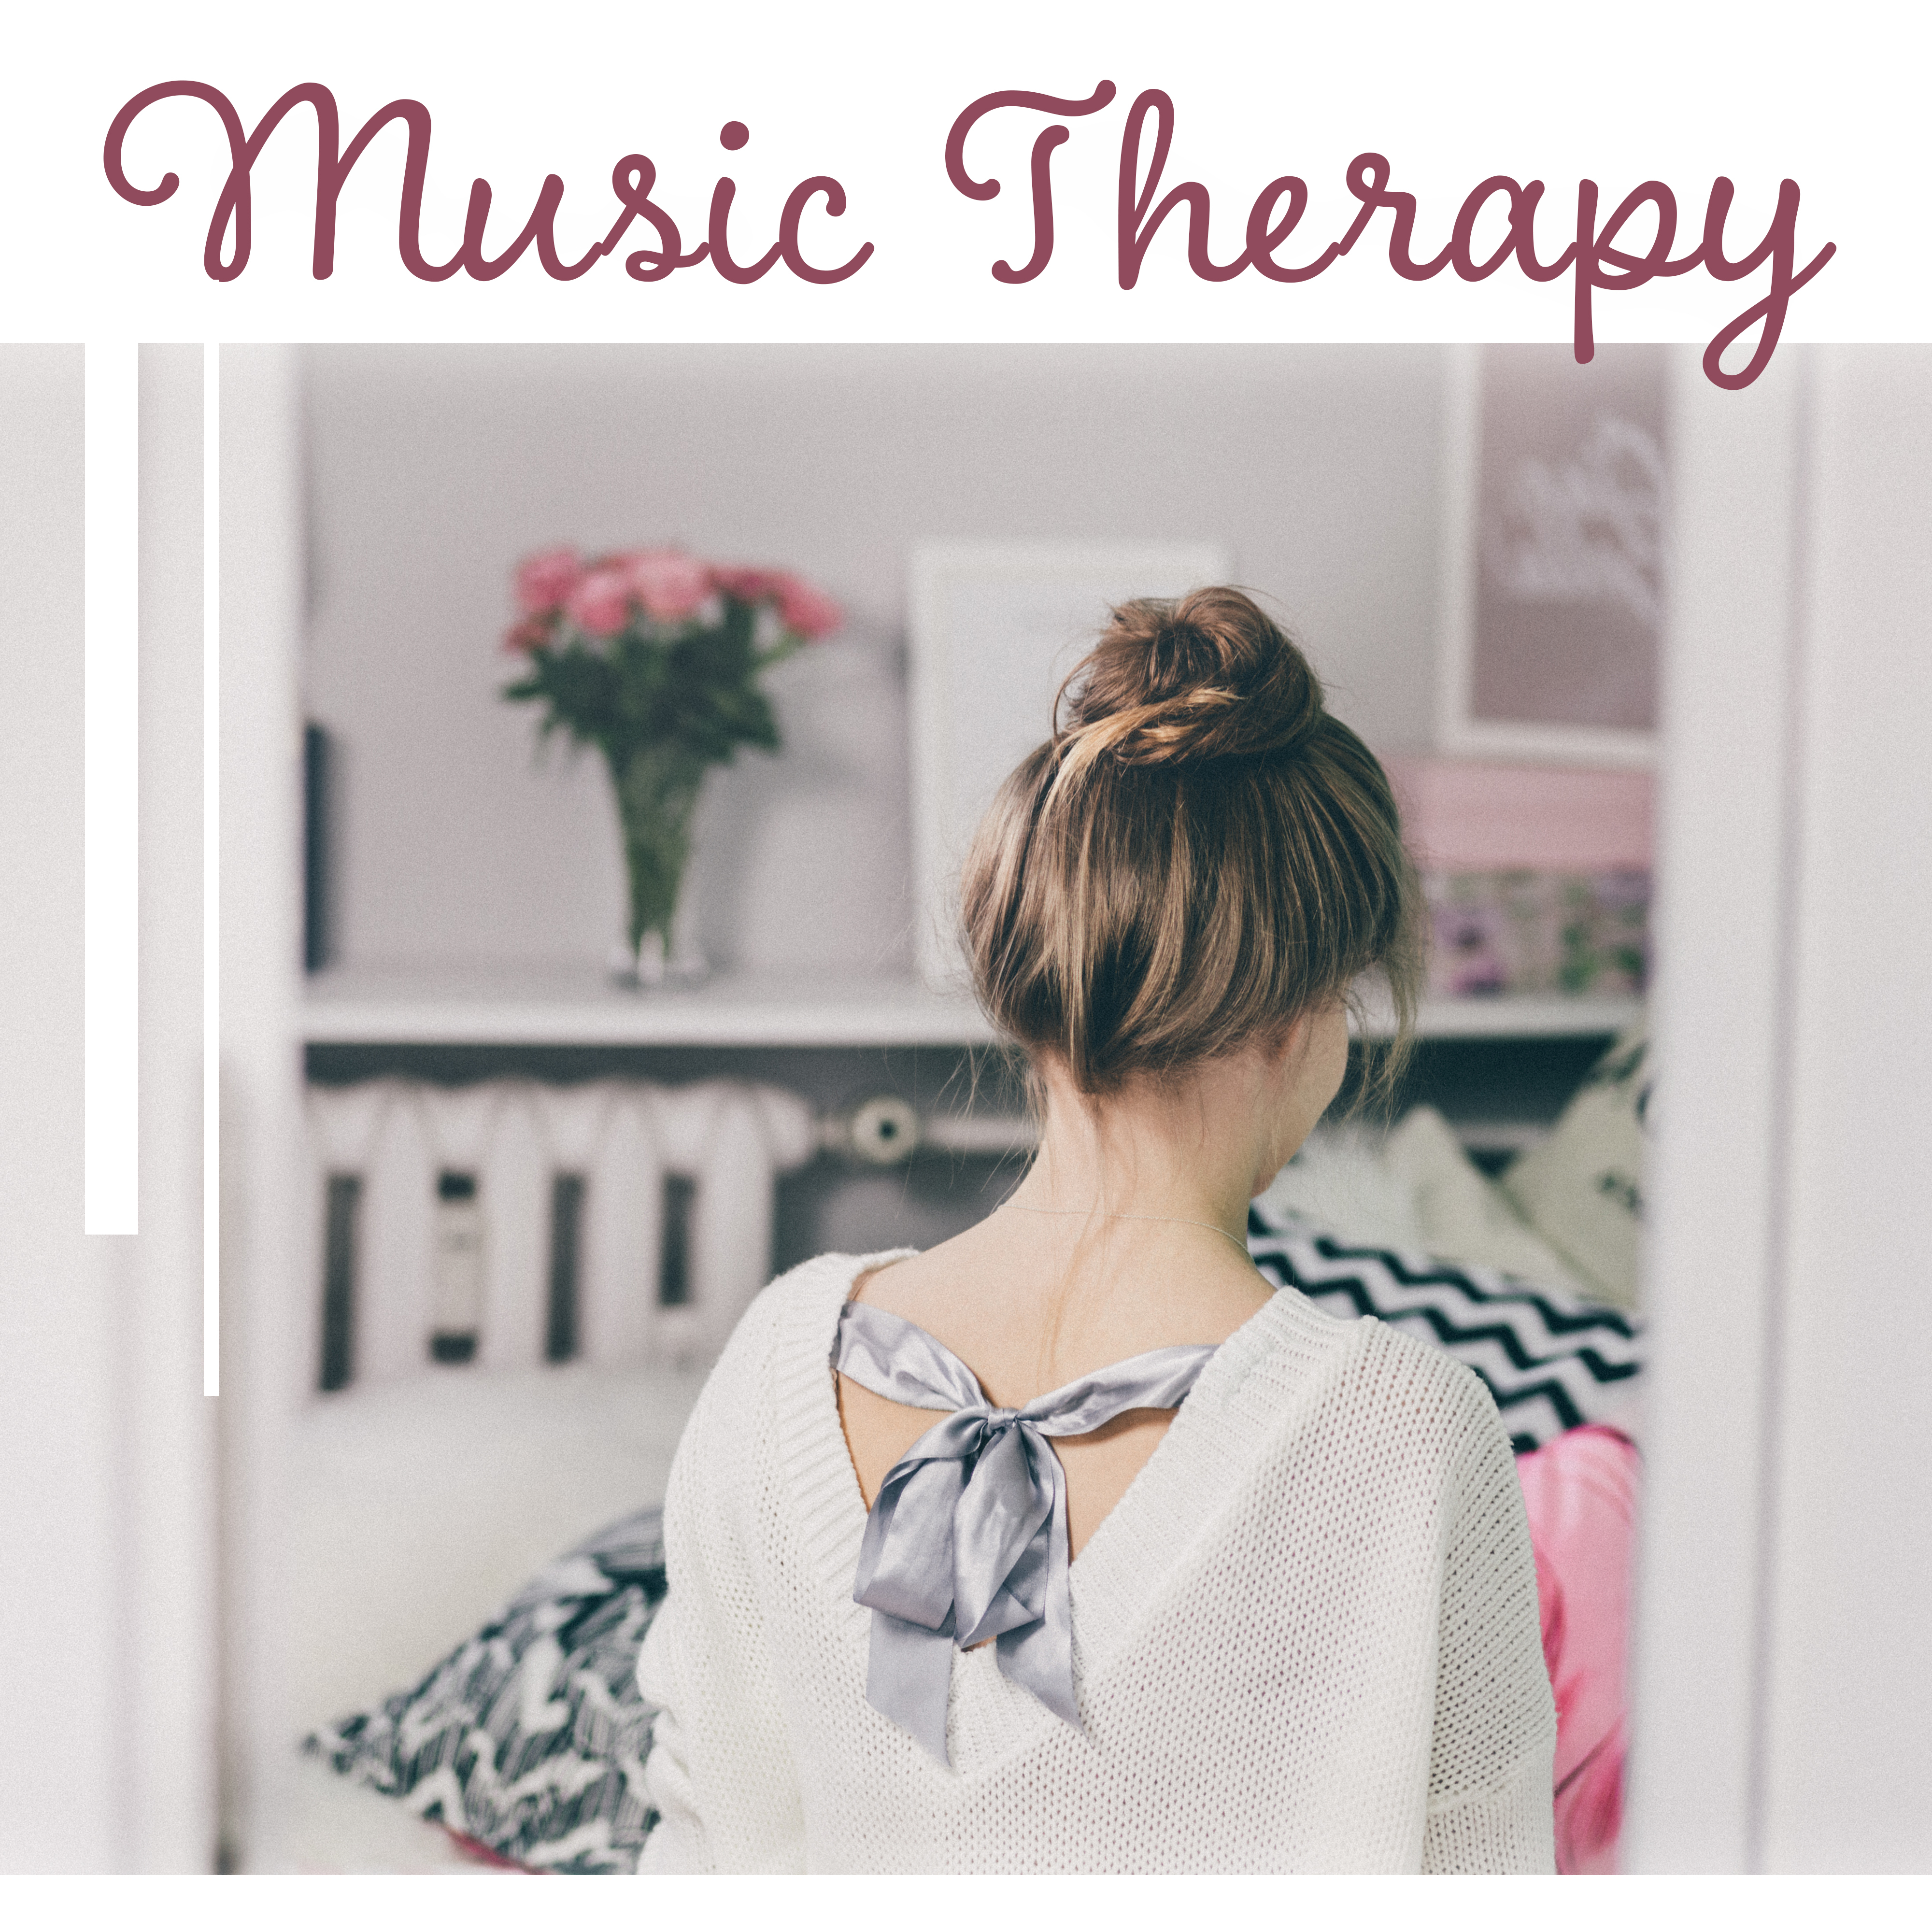 Music Therapy  New Age Sounds for Relaxation, Stress Relief, Peaceful Mind, Inner Calmness, Music Reduces Stress, Zen Music